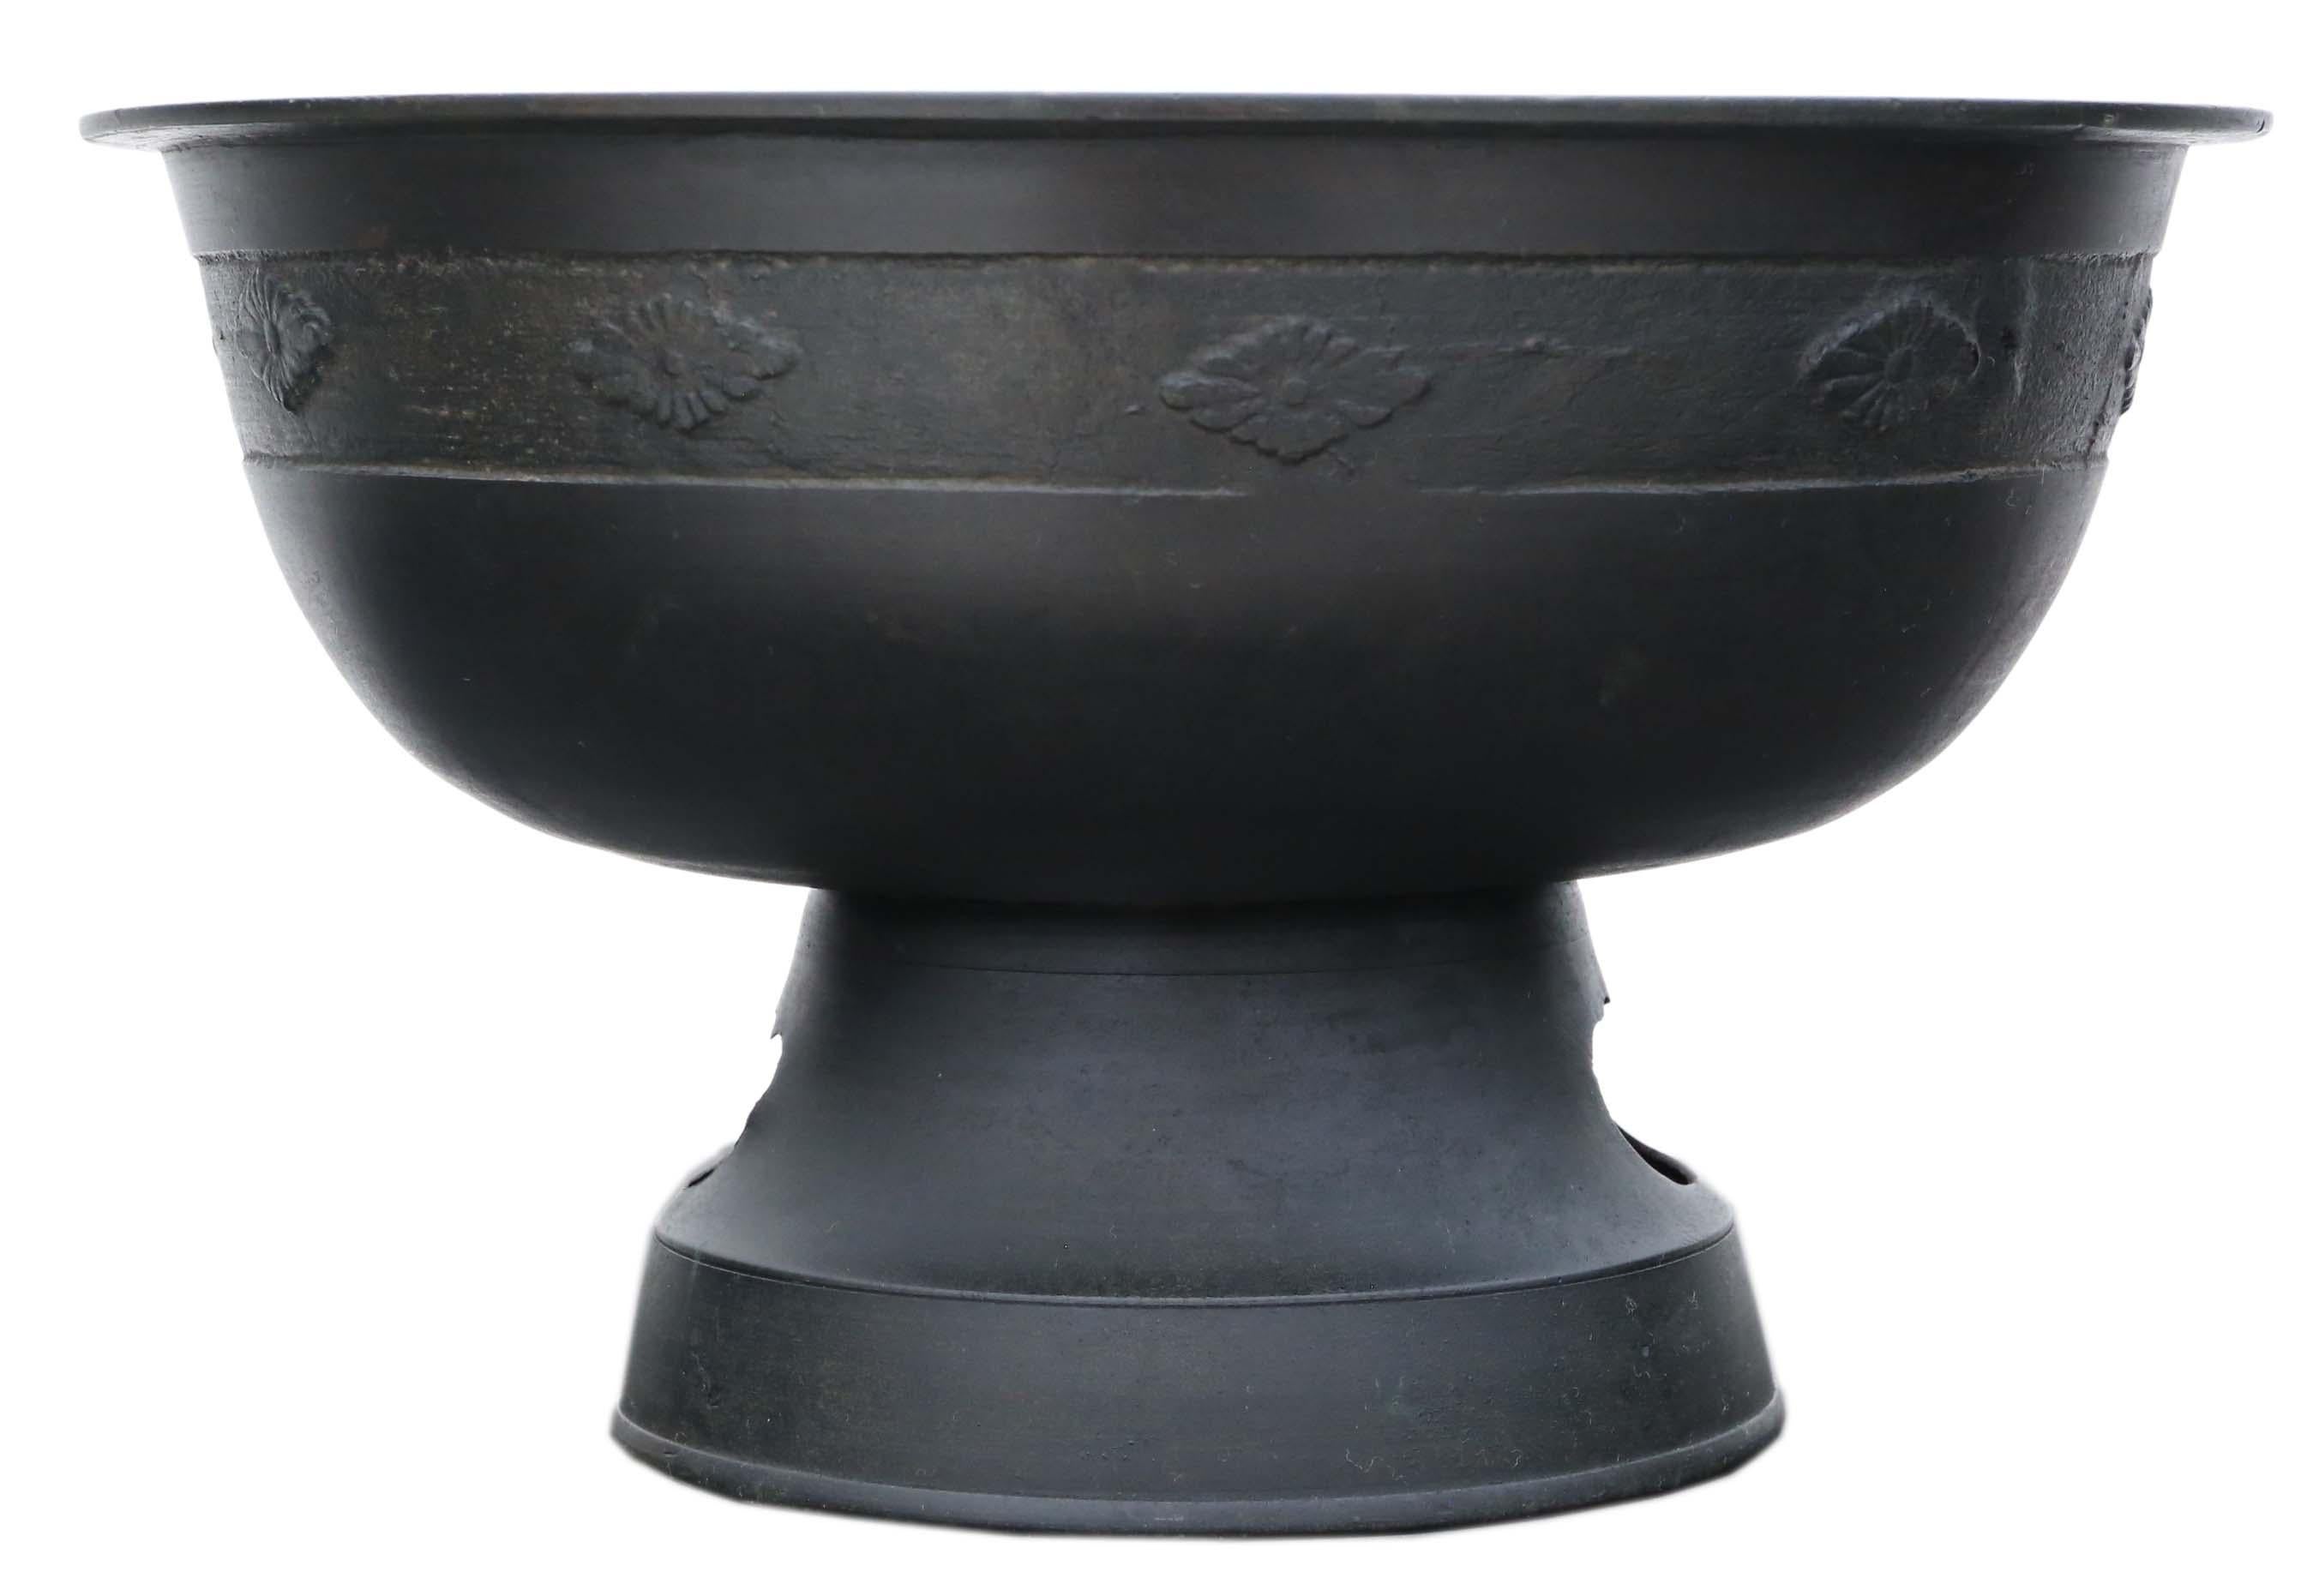 Antique Oriental Japanese large fine quality bronze Buddhist Tearai basin for water libation in a temple. Dates from the late Edo Period, mid 19th Century and is well suited for use as a bowl, planter or jardinière. 

Would look amazing in the